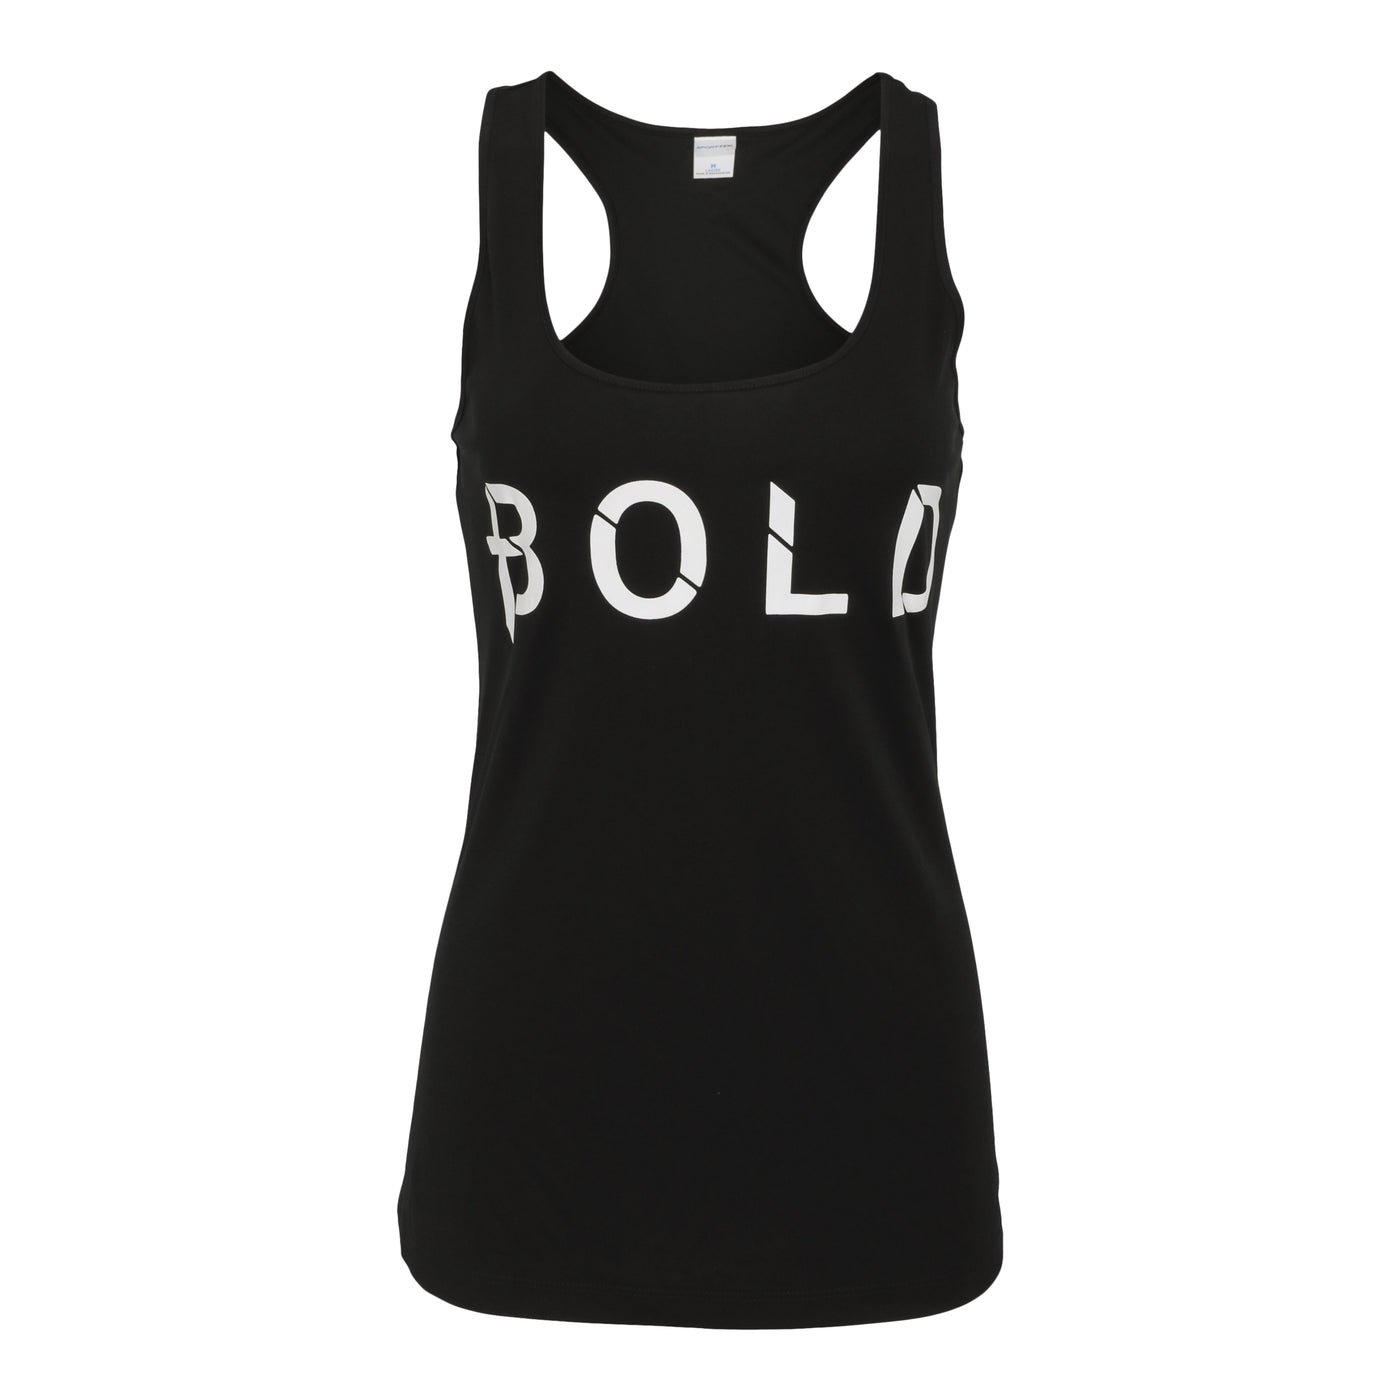 Created Women's Bold Performance black tank top alternate front view